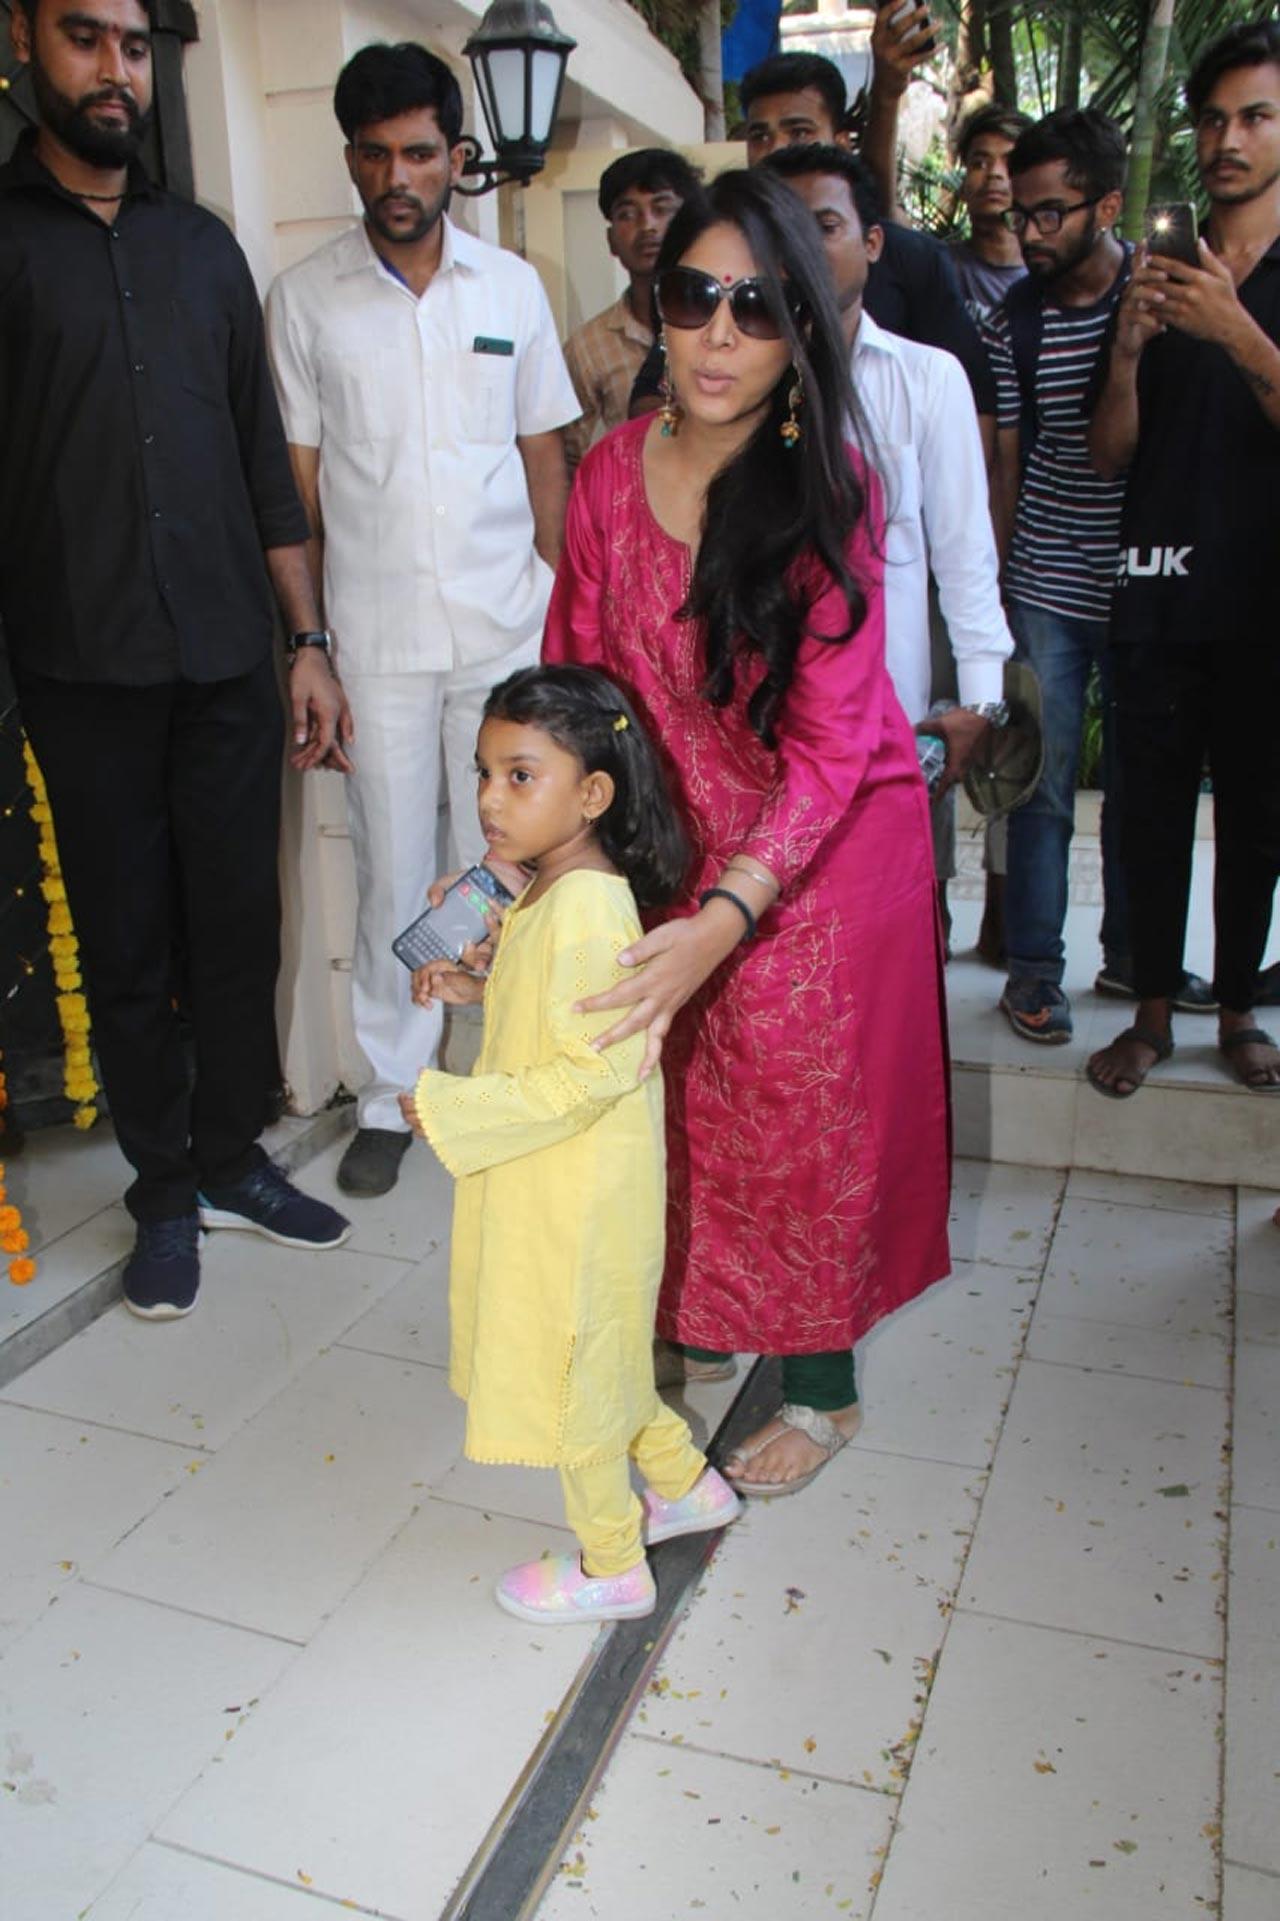 Sakshi Tanwar and her daughter Dityaa was also a part of the celebration